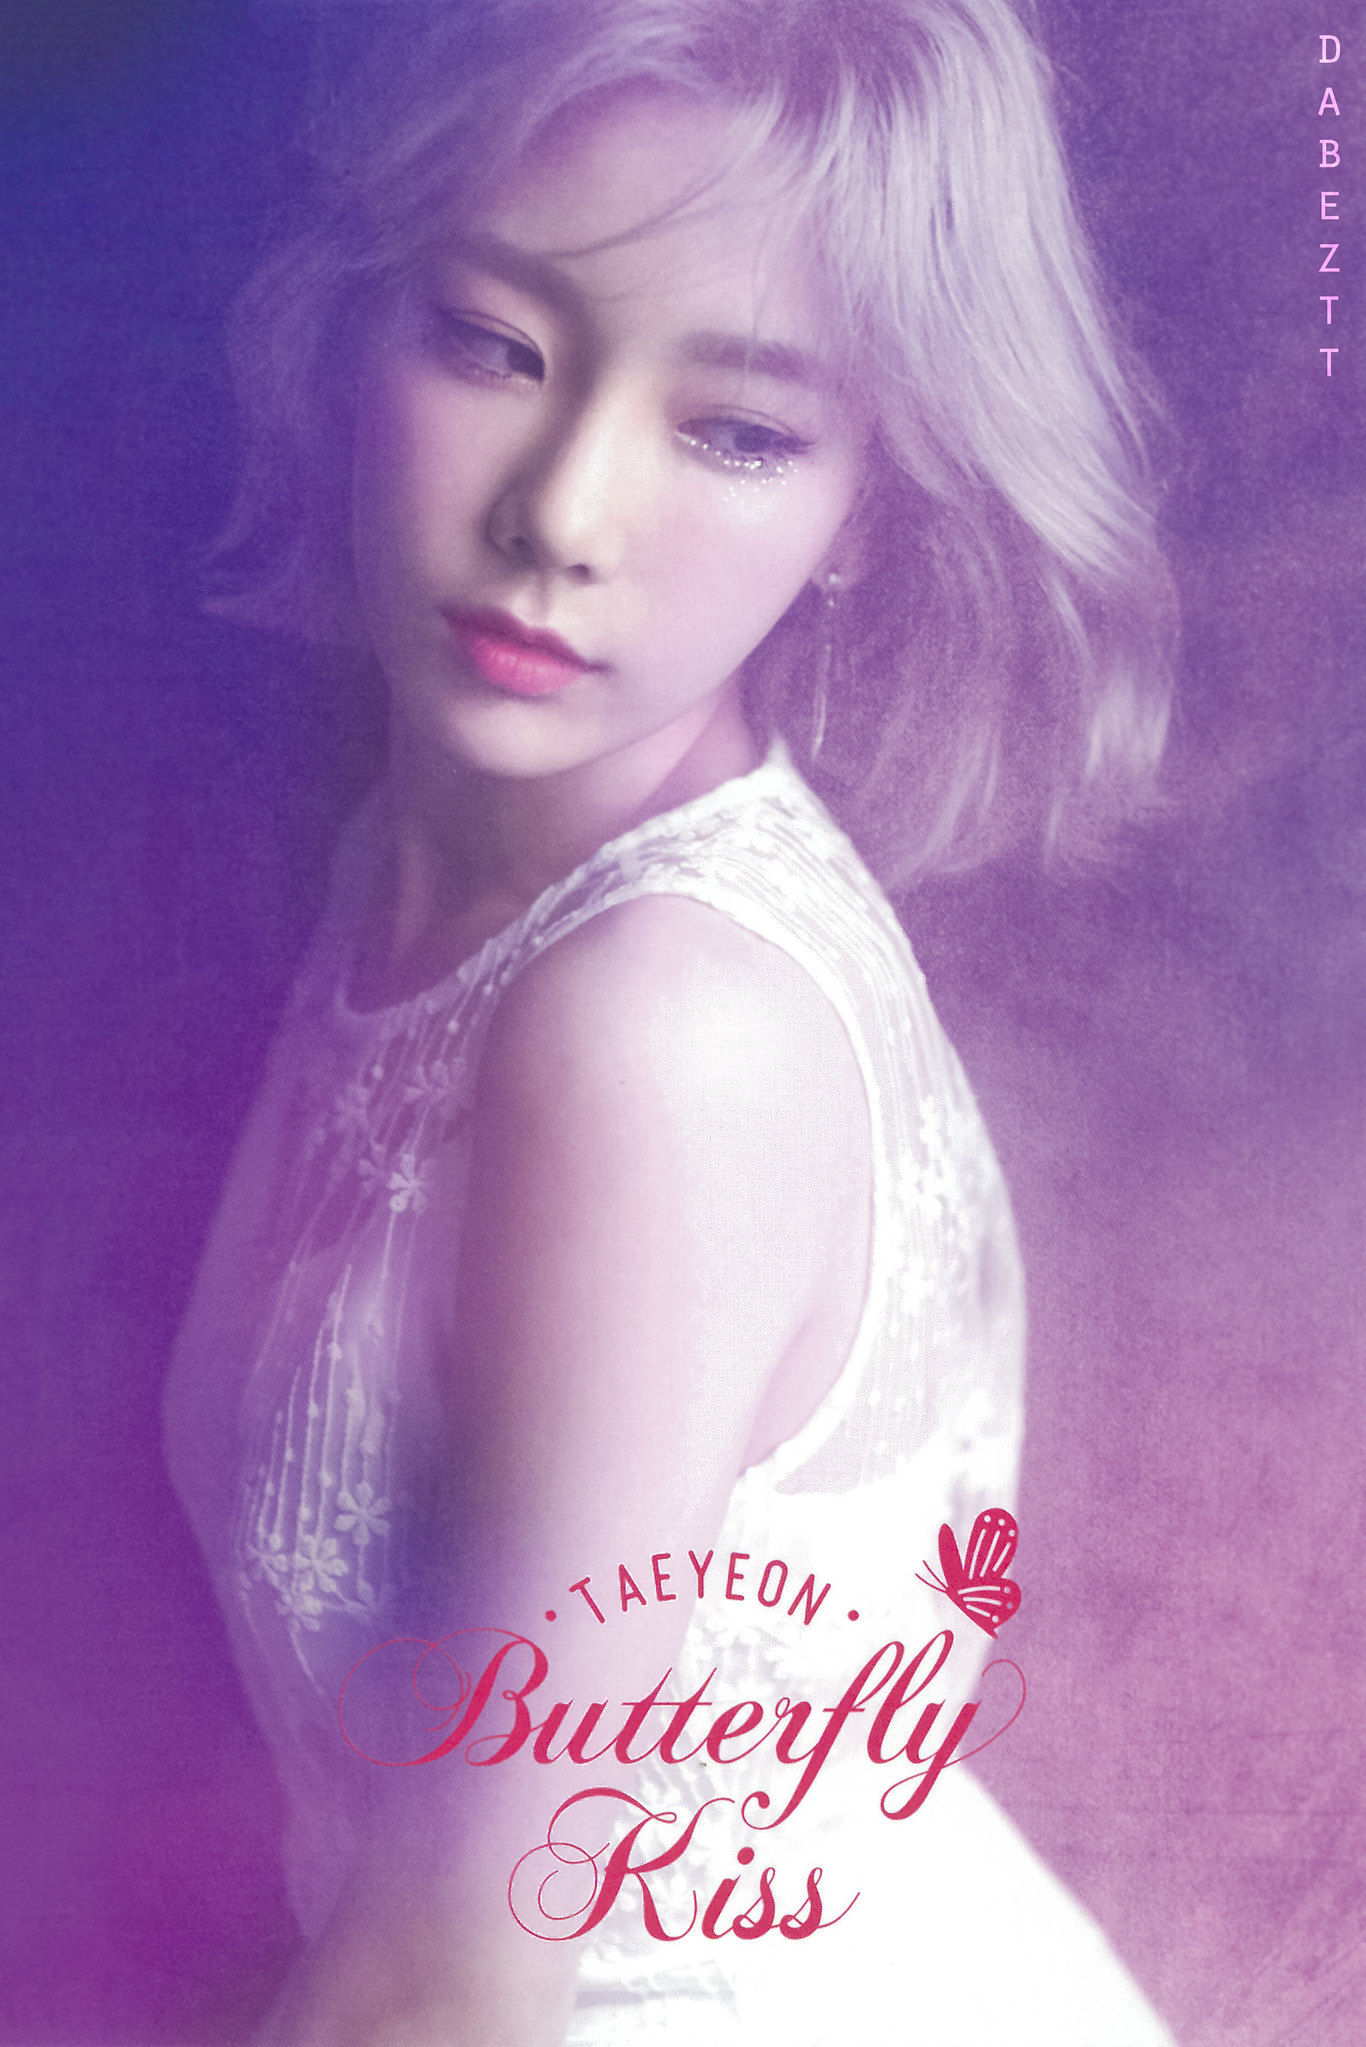 [PIC][24-05-2016]TaeYeon @ Solo Concert “Butterfly Kiss” 27660031004_09862f6eb8_k